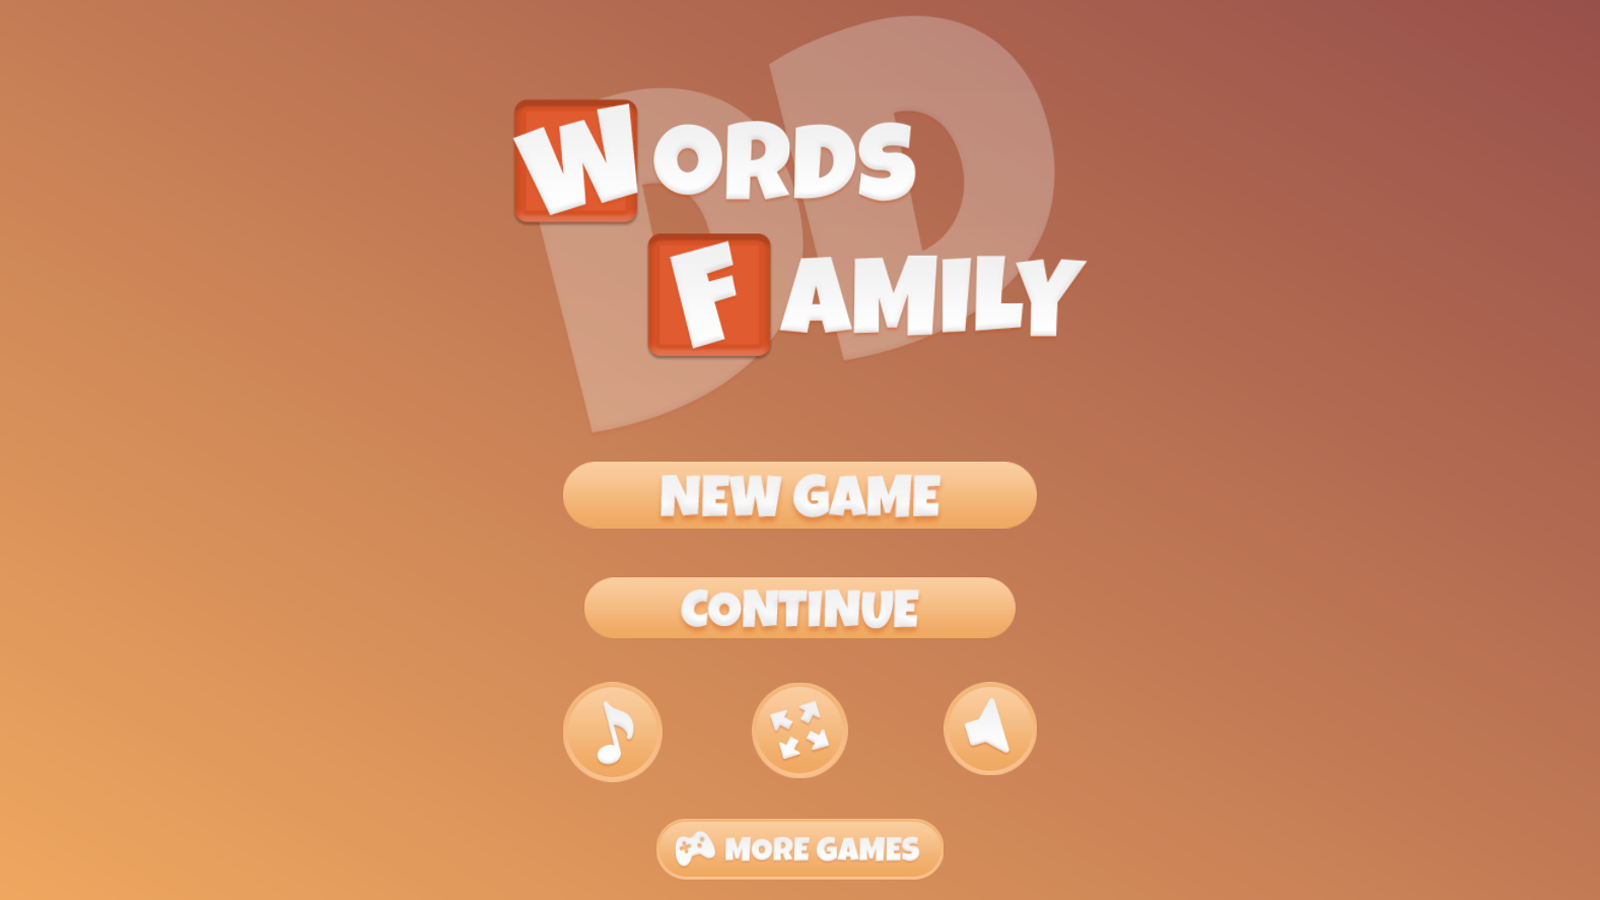 Words Family Game Welcome Screenshot.